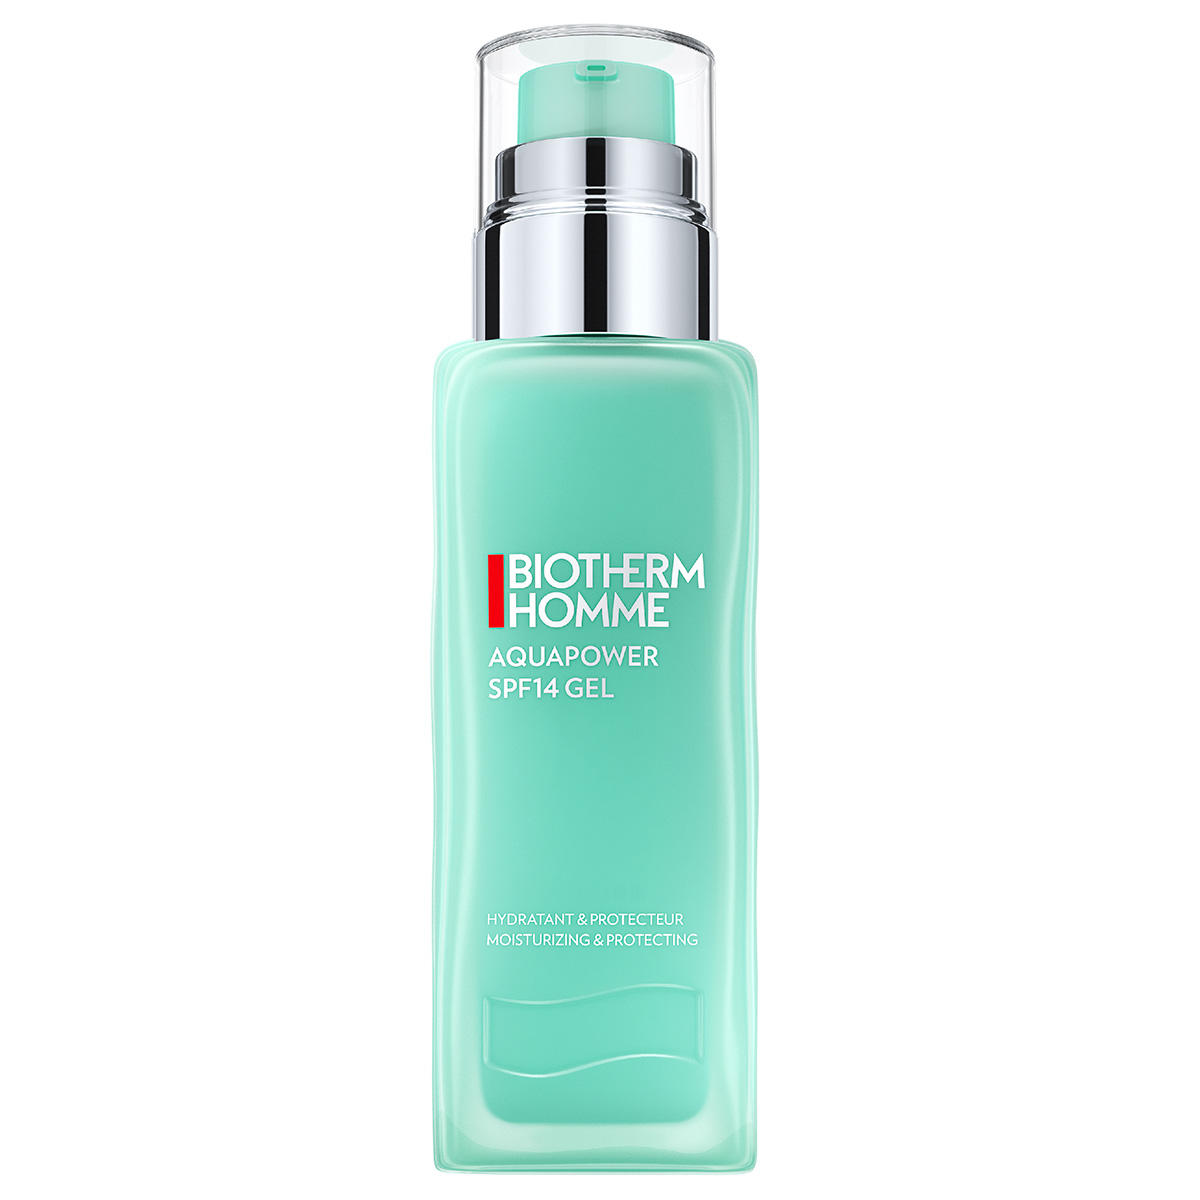 Biotherm Homme Aquapower Gel facial SPF14 75 ml - 1